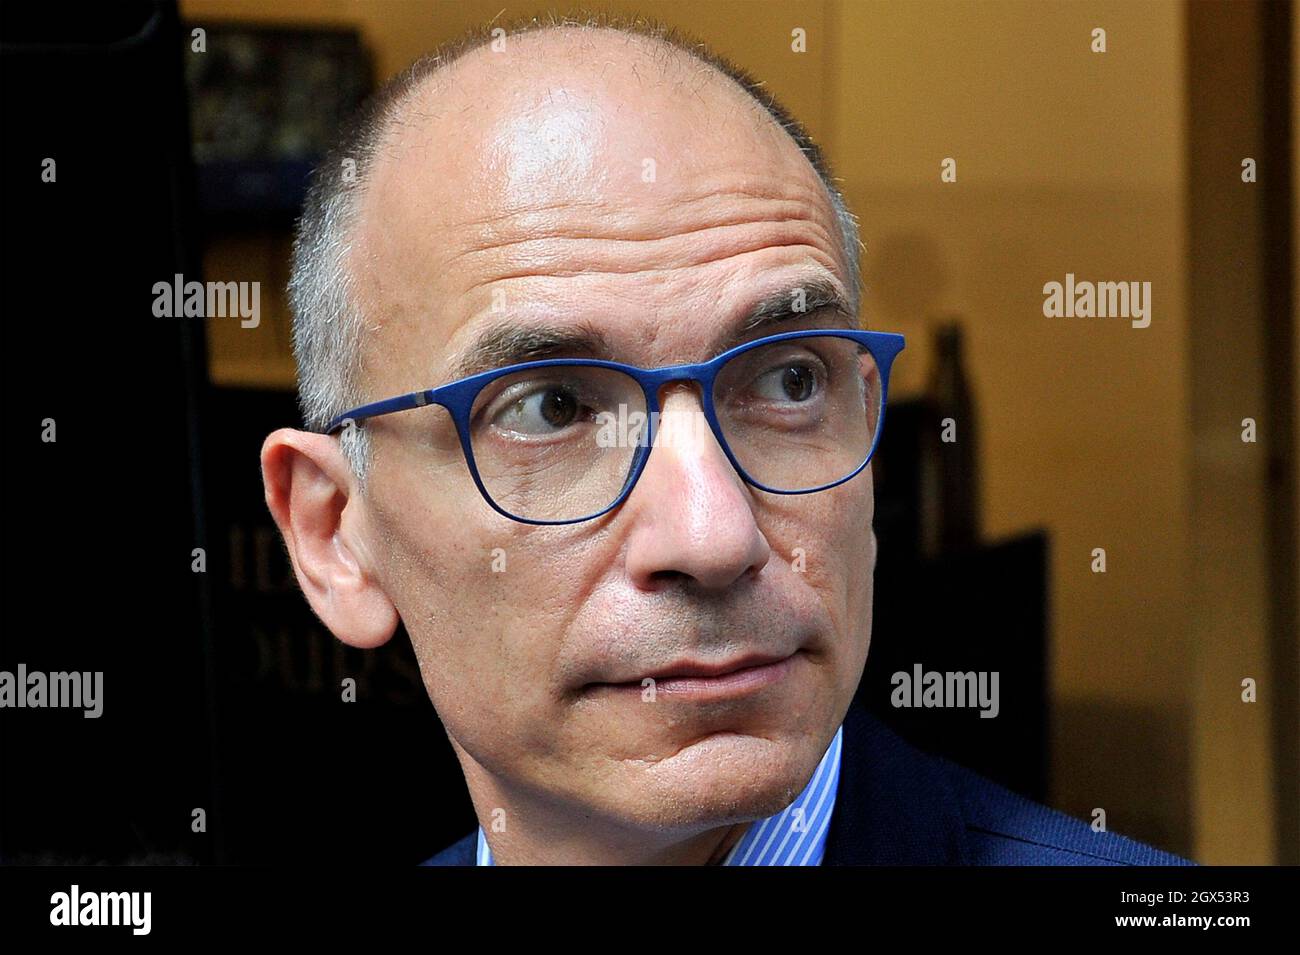 Enrico Letta secretary of the PD, during his visit to Naples to support the mayoral candidate for the city of Naples Gaetano Manfredi. Stock Photo